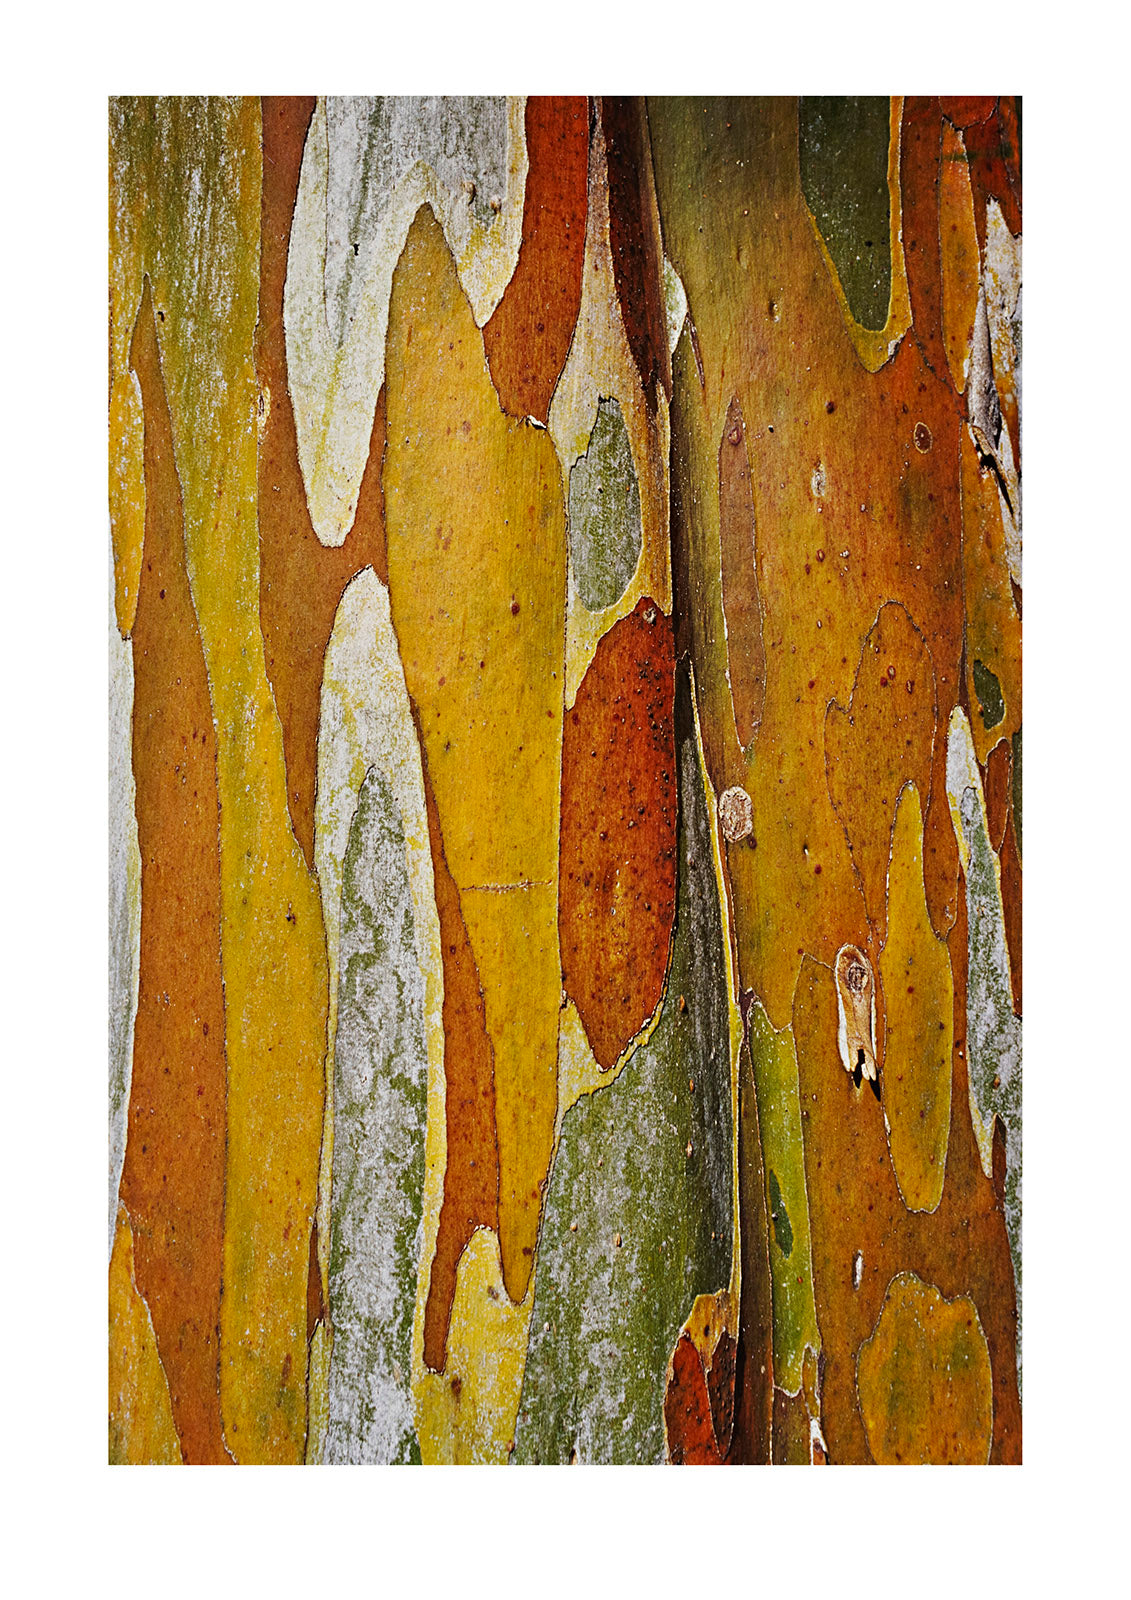 Abstract created by a close view of snow gum tree bark. Alpine National Park, Victoria, Australia.